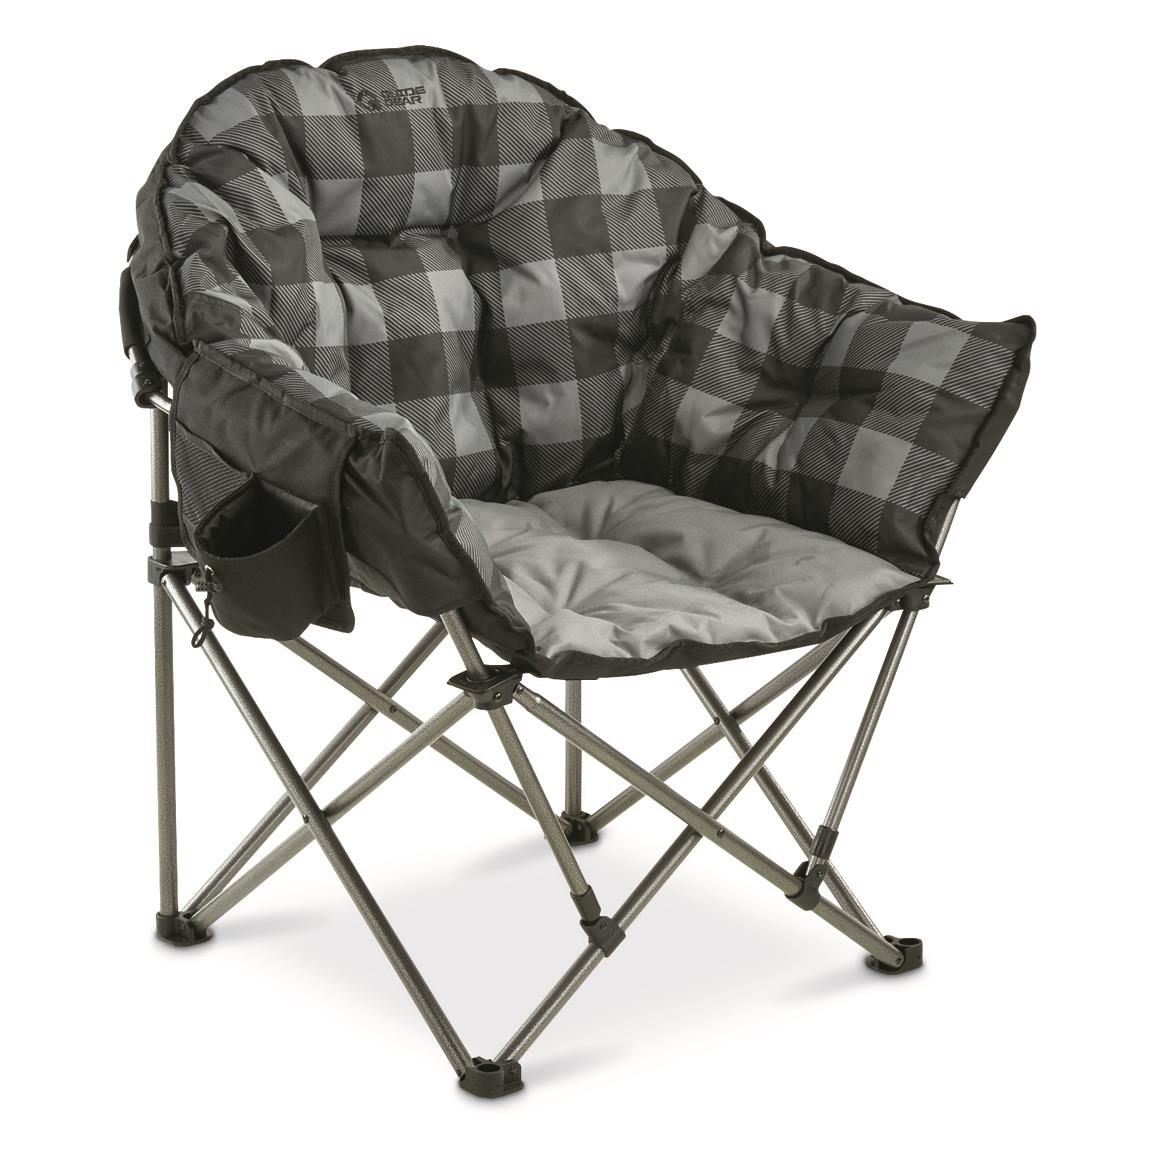 sturdy camping chairs